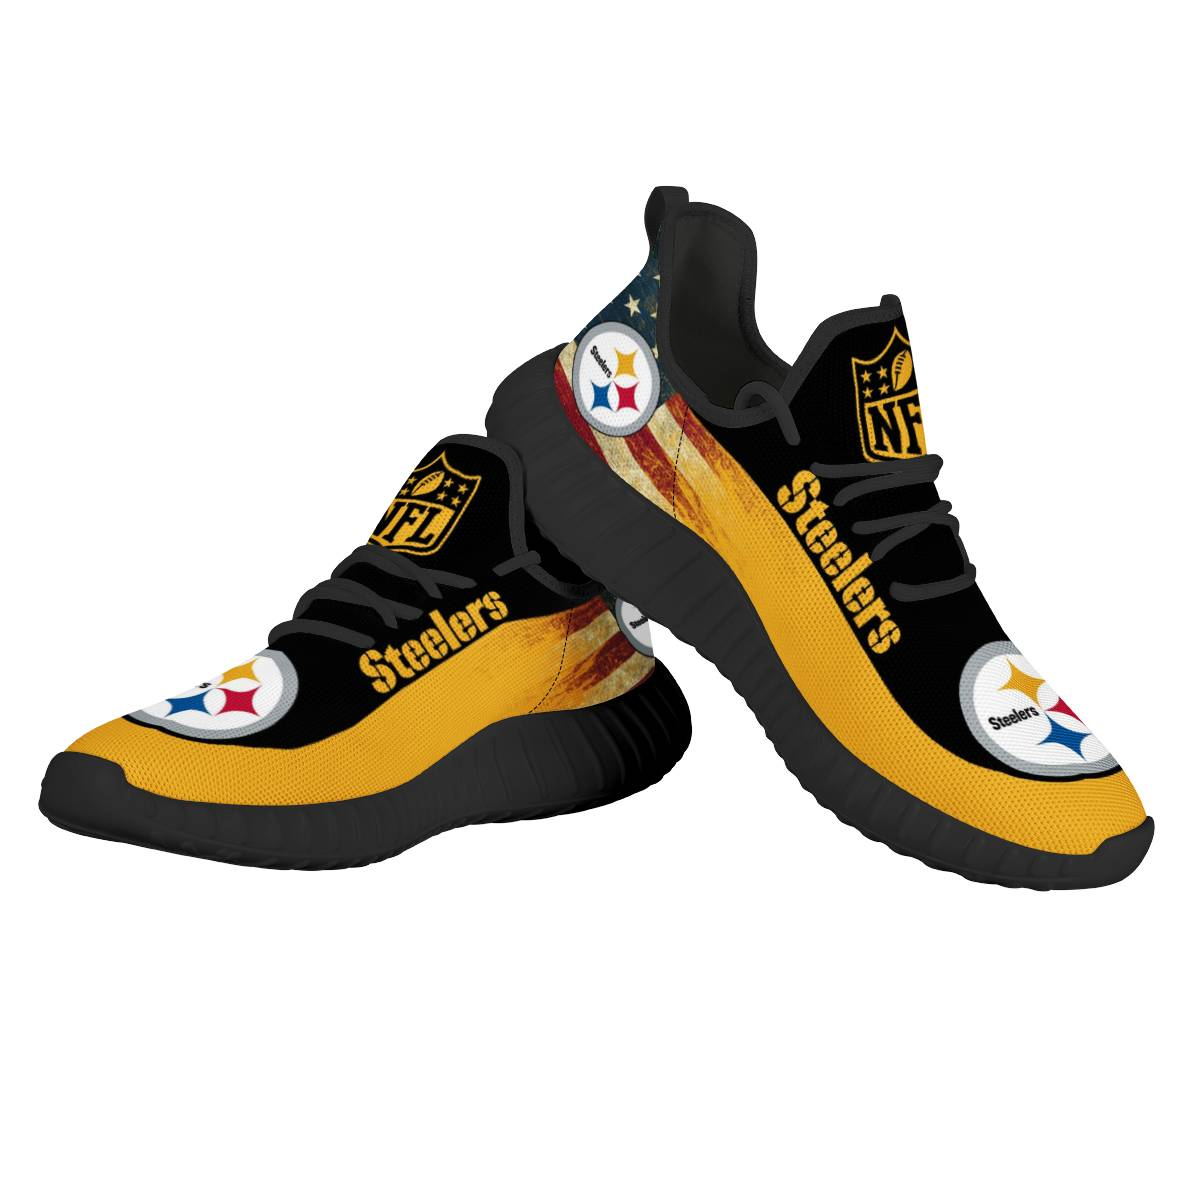 Men's Pittsburgh Steelers Mesh Knit Sneakers/Shoes 015